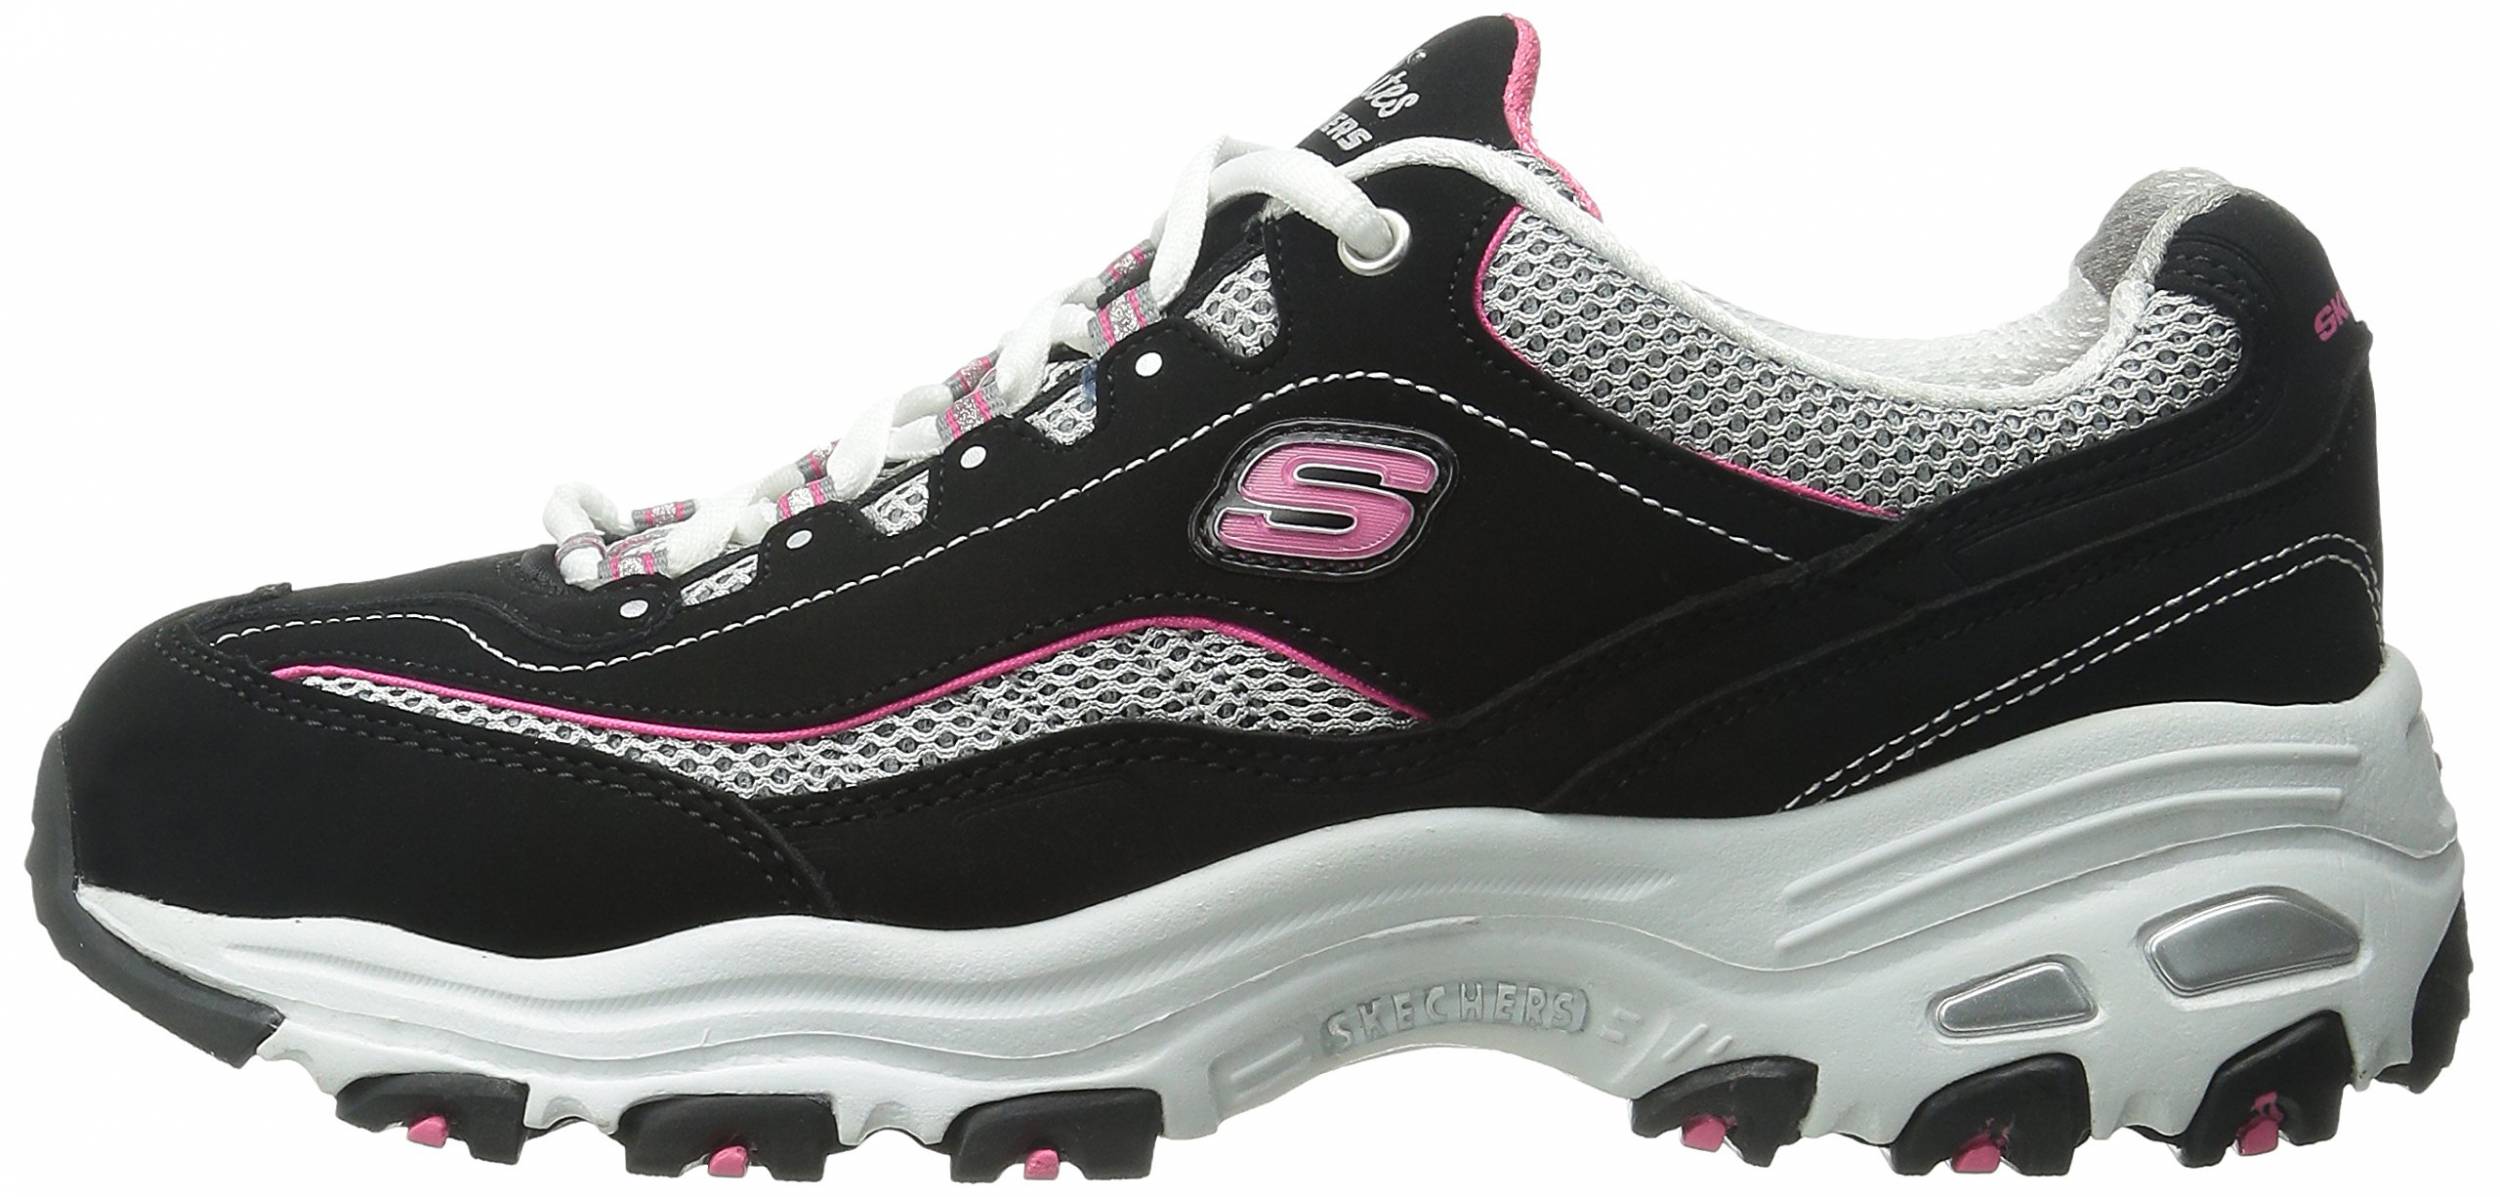 skechers more like this